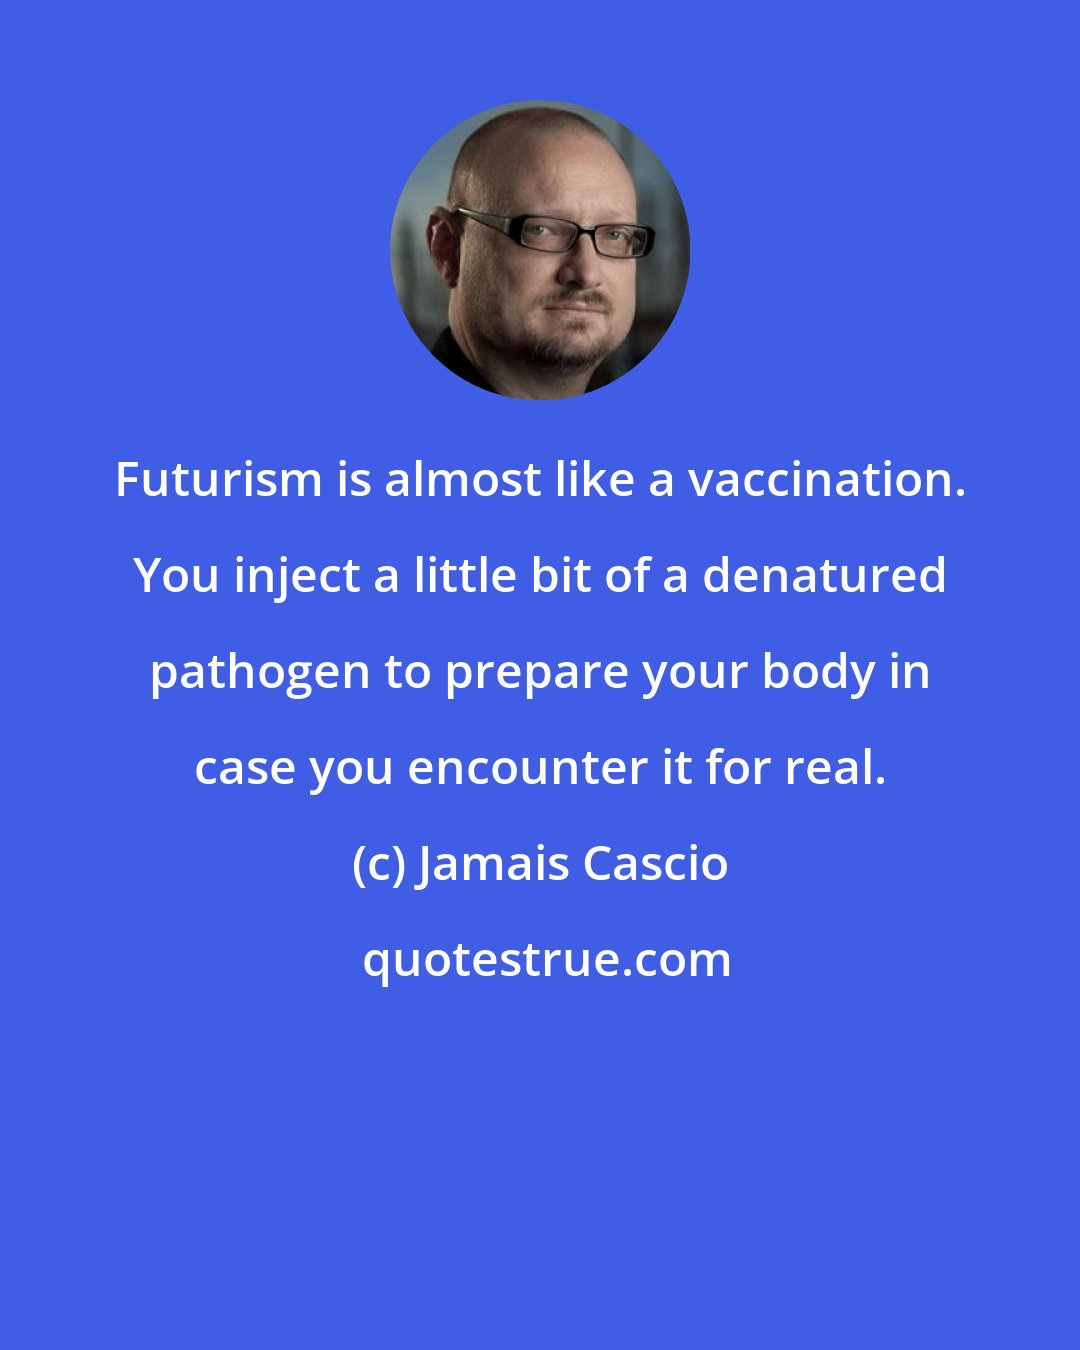 Jamais Cascio: Futurism is almost like a vaccination. You inject a little bit of a denatured pathogen to prepare your body in case you encounter it for real.